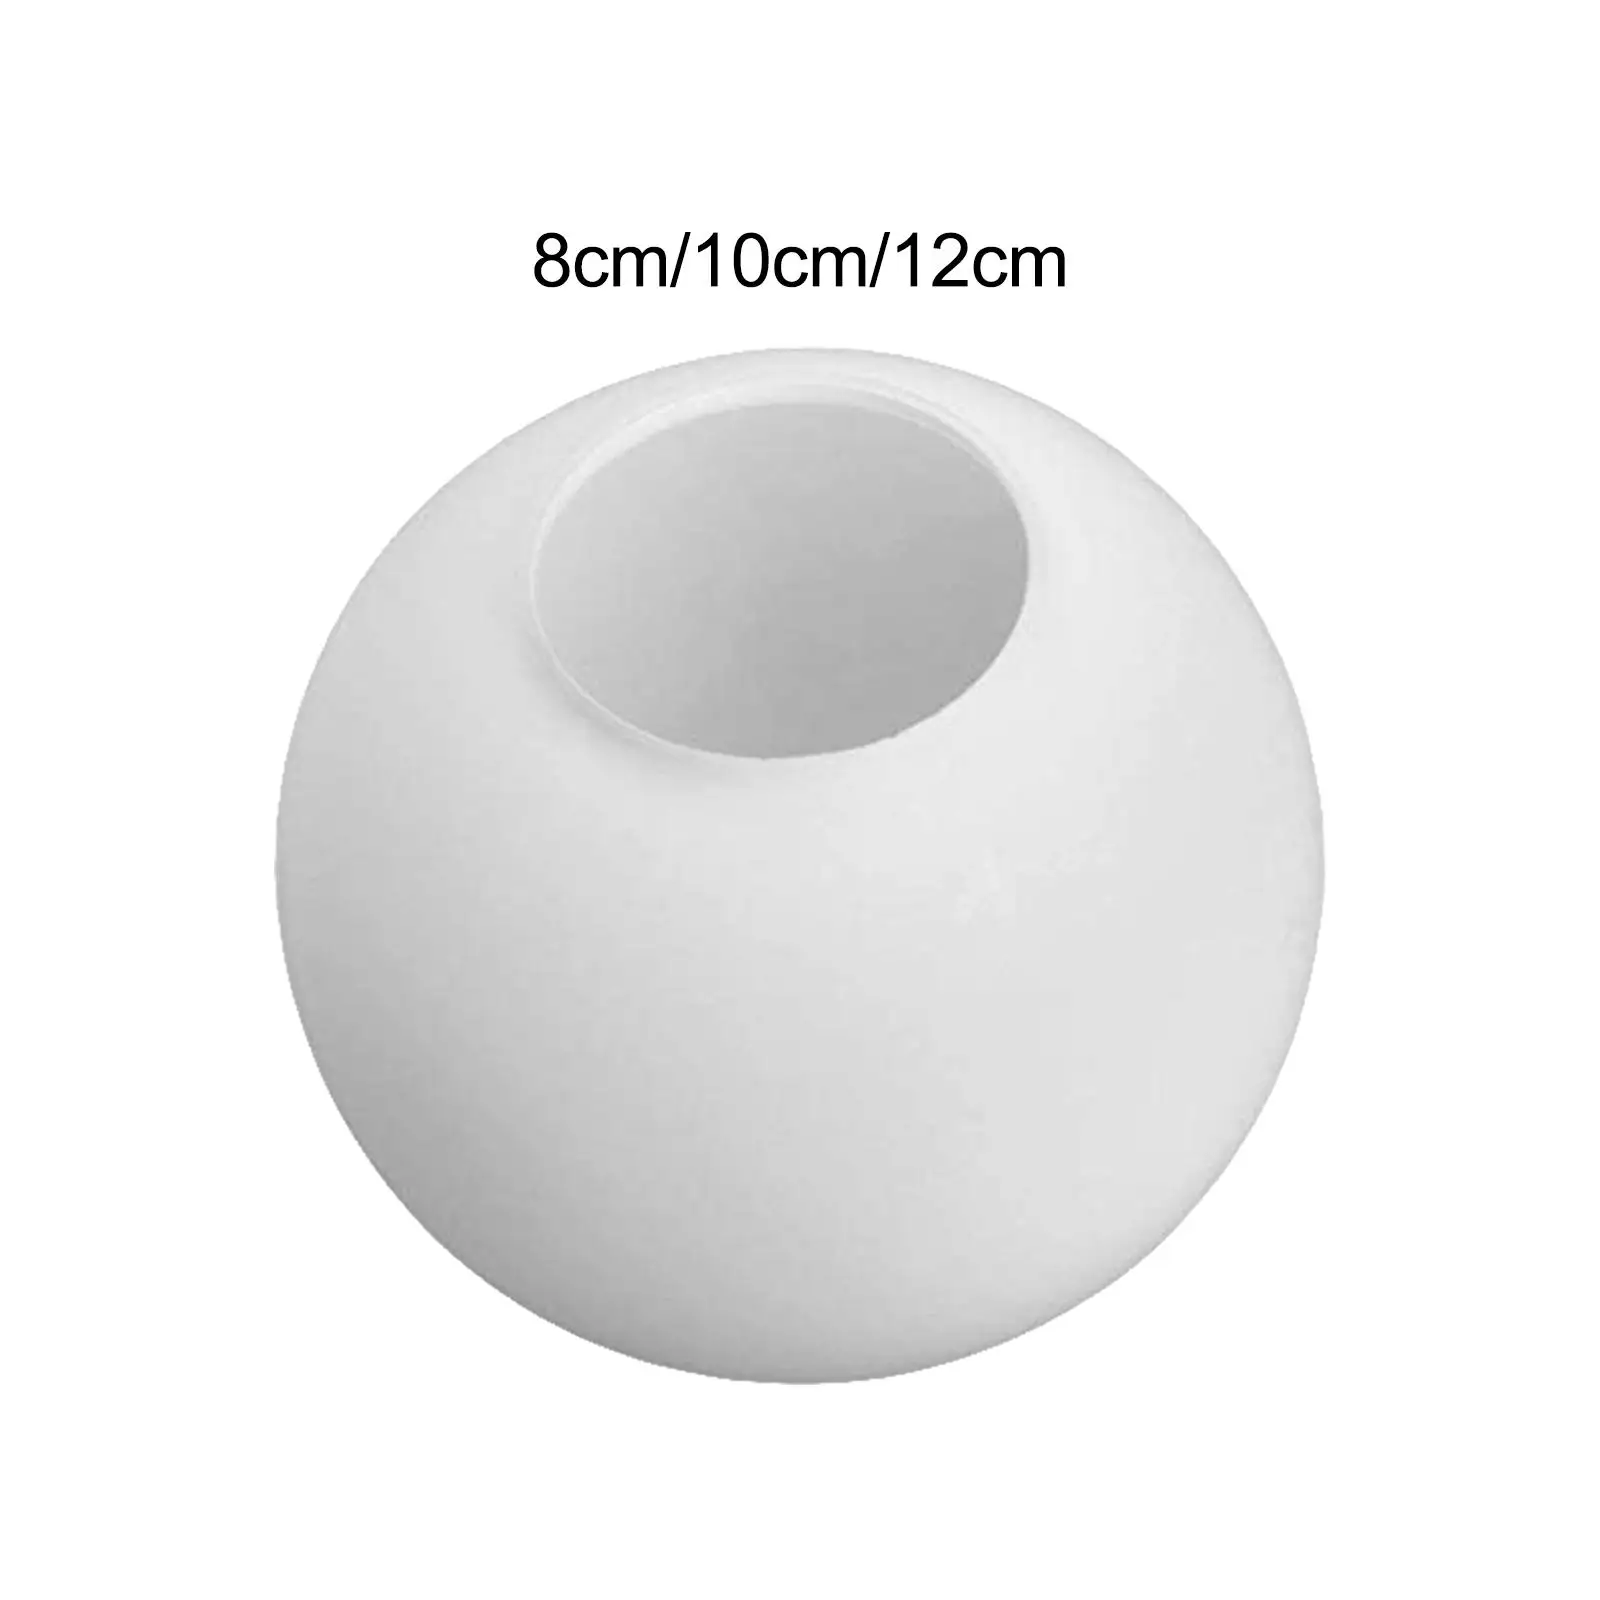 Frosted Glass Lamp Shade Chandelier Hanging Light Cover Round Fixture Cover for Teahouse Kitchen Dining Room Hotel Office